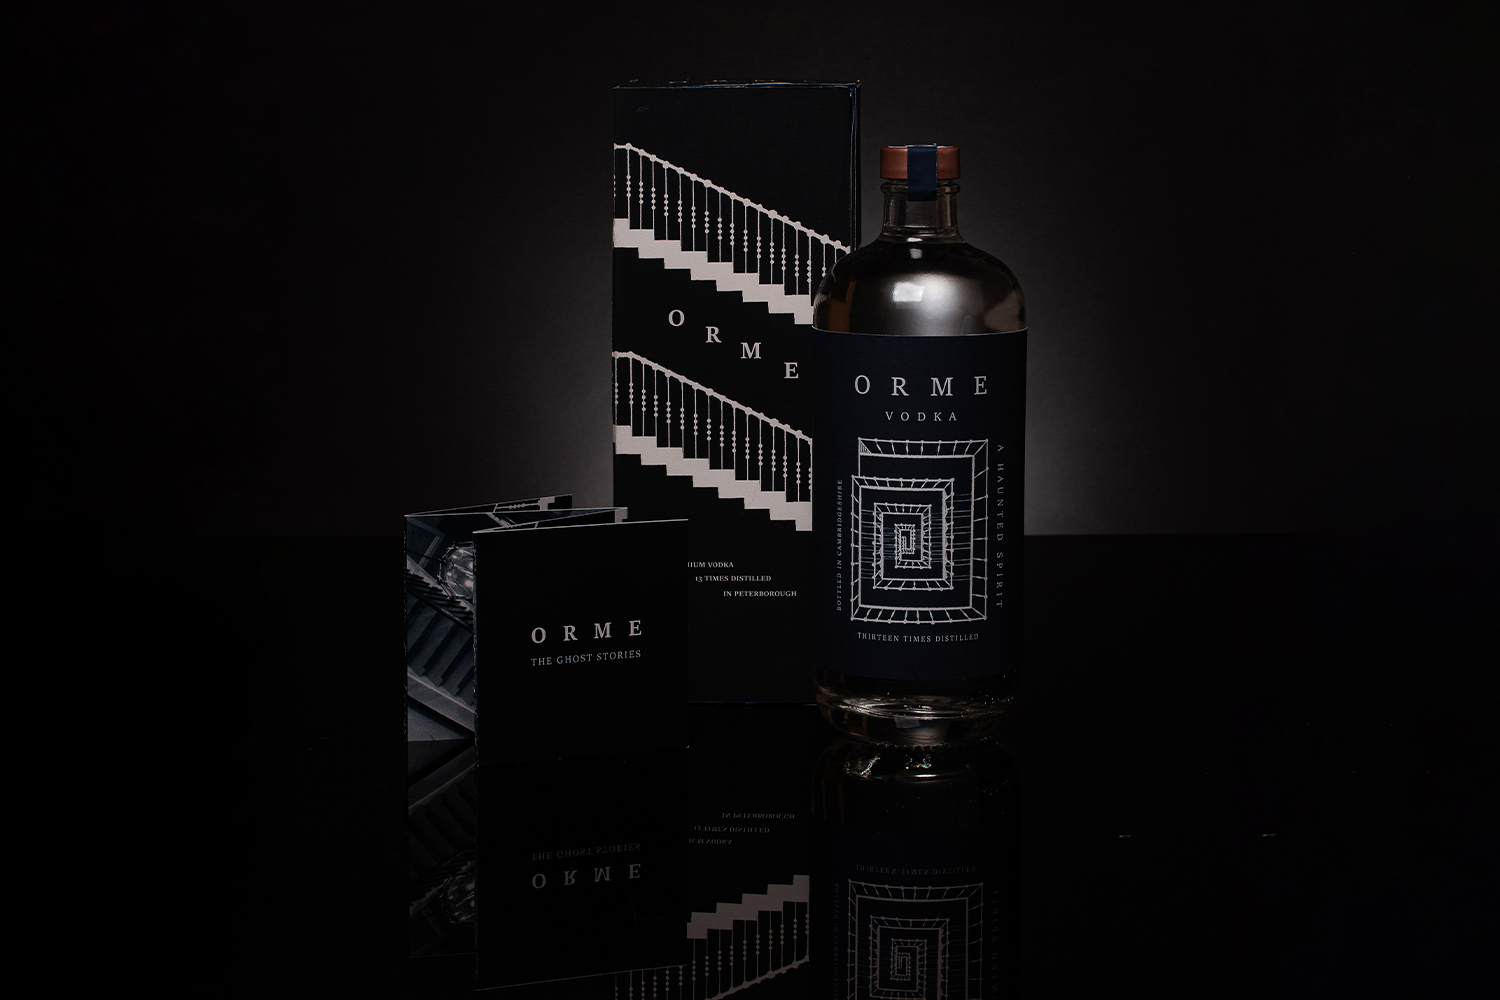 A photo of a leaflet, bottle and box for Orme Vodka. All following the illustrative spiral staircase theme.